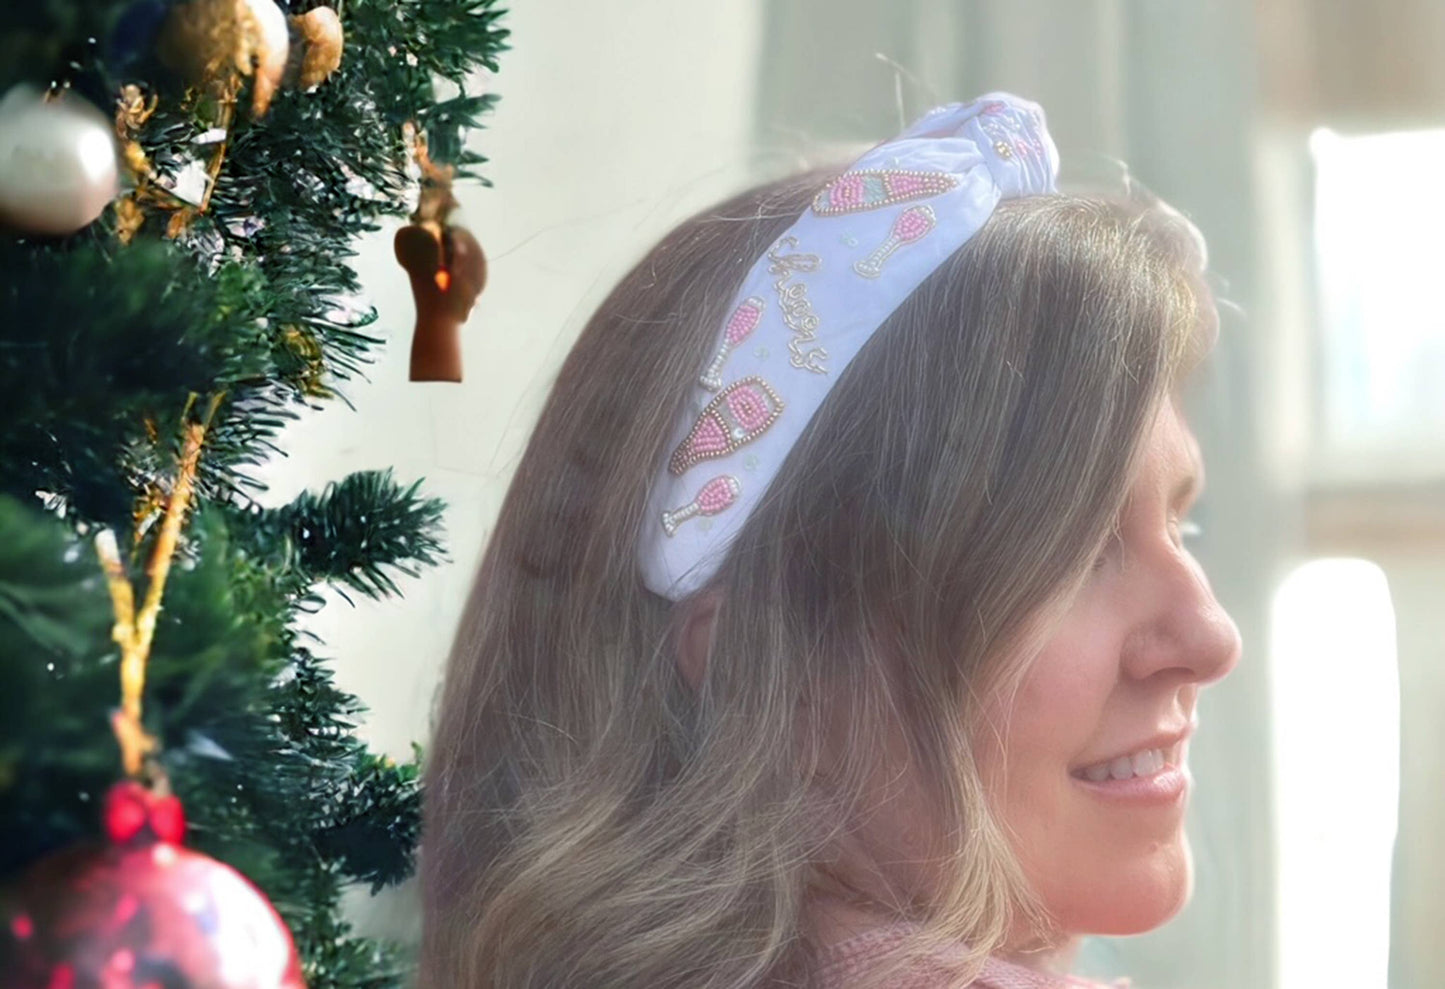 A woman wearing a Bash Beaded Pink Christmas Lights Headband in front of a Christmas tree.